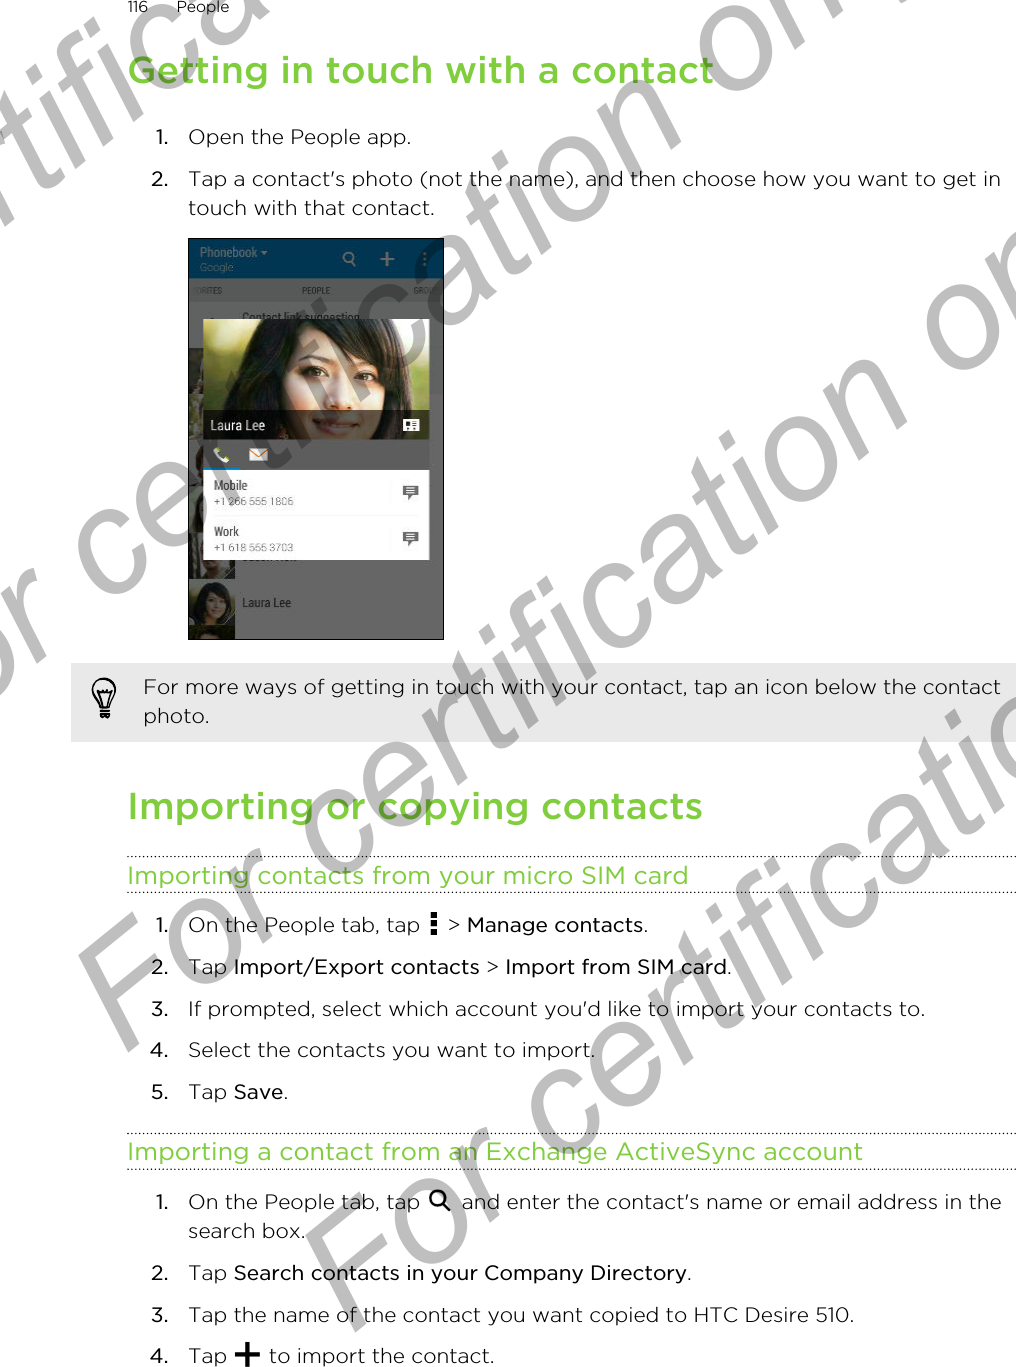 Getting in touch with a contact1. Open the People app.2. Tap a contact&apos;s photo (not the name), and then choose how you want to get intouch with that contact. For more ways of getting in touch with your contact, tap an icon below the contactphoto.Importing or copying contactsImporting contacts from your micro SIM card1. On the People tab, tap   &gt; Manage contacts.2. Tap Import/Export contacts &gt; Import from SIM card.3. If prompted, select which account you&apos;d like to import your contacts to.4. Select the contacts you want to import.5. Tap Save.Importing a contact from an Exchange ActiveSync account1. On the People tab, tap   and enter the contact&apos;s name or email address in thesearch box.2. Tap Search contacts in your Company Directory.3. Tap the name of the contact you want copied to HTC Desire 510.4. Tap   to import the contact.116 PeopleFor certification  For certification only  For certification only  For certification only 